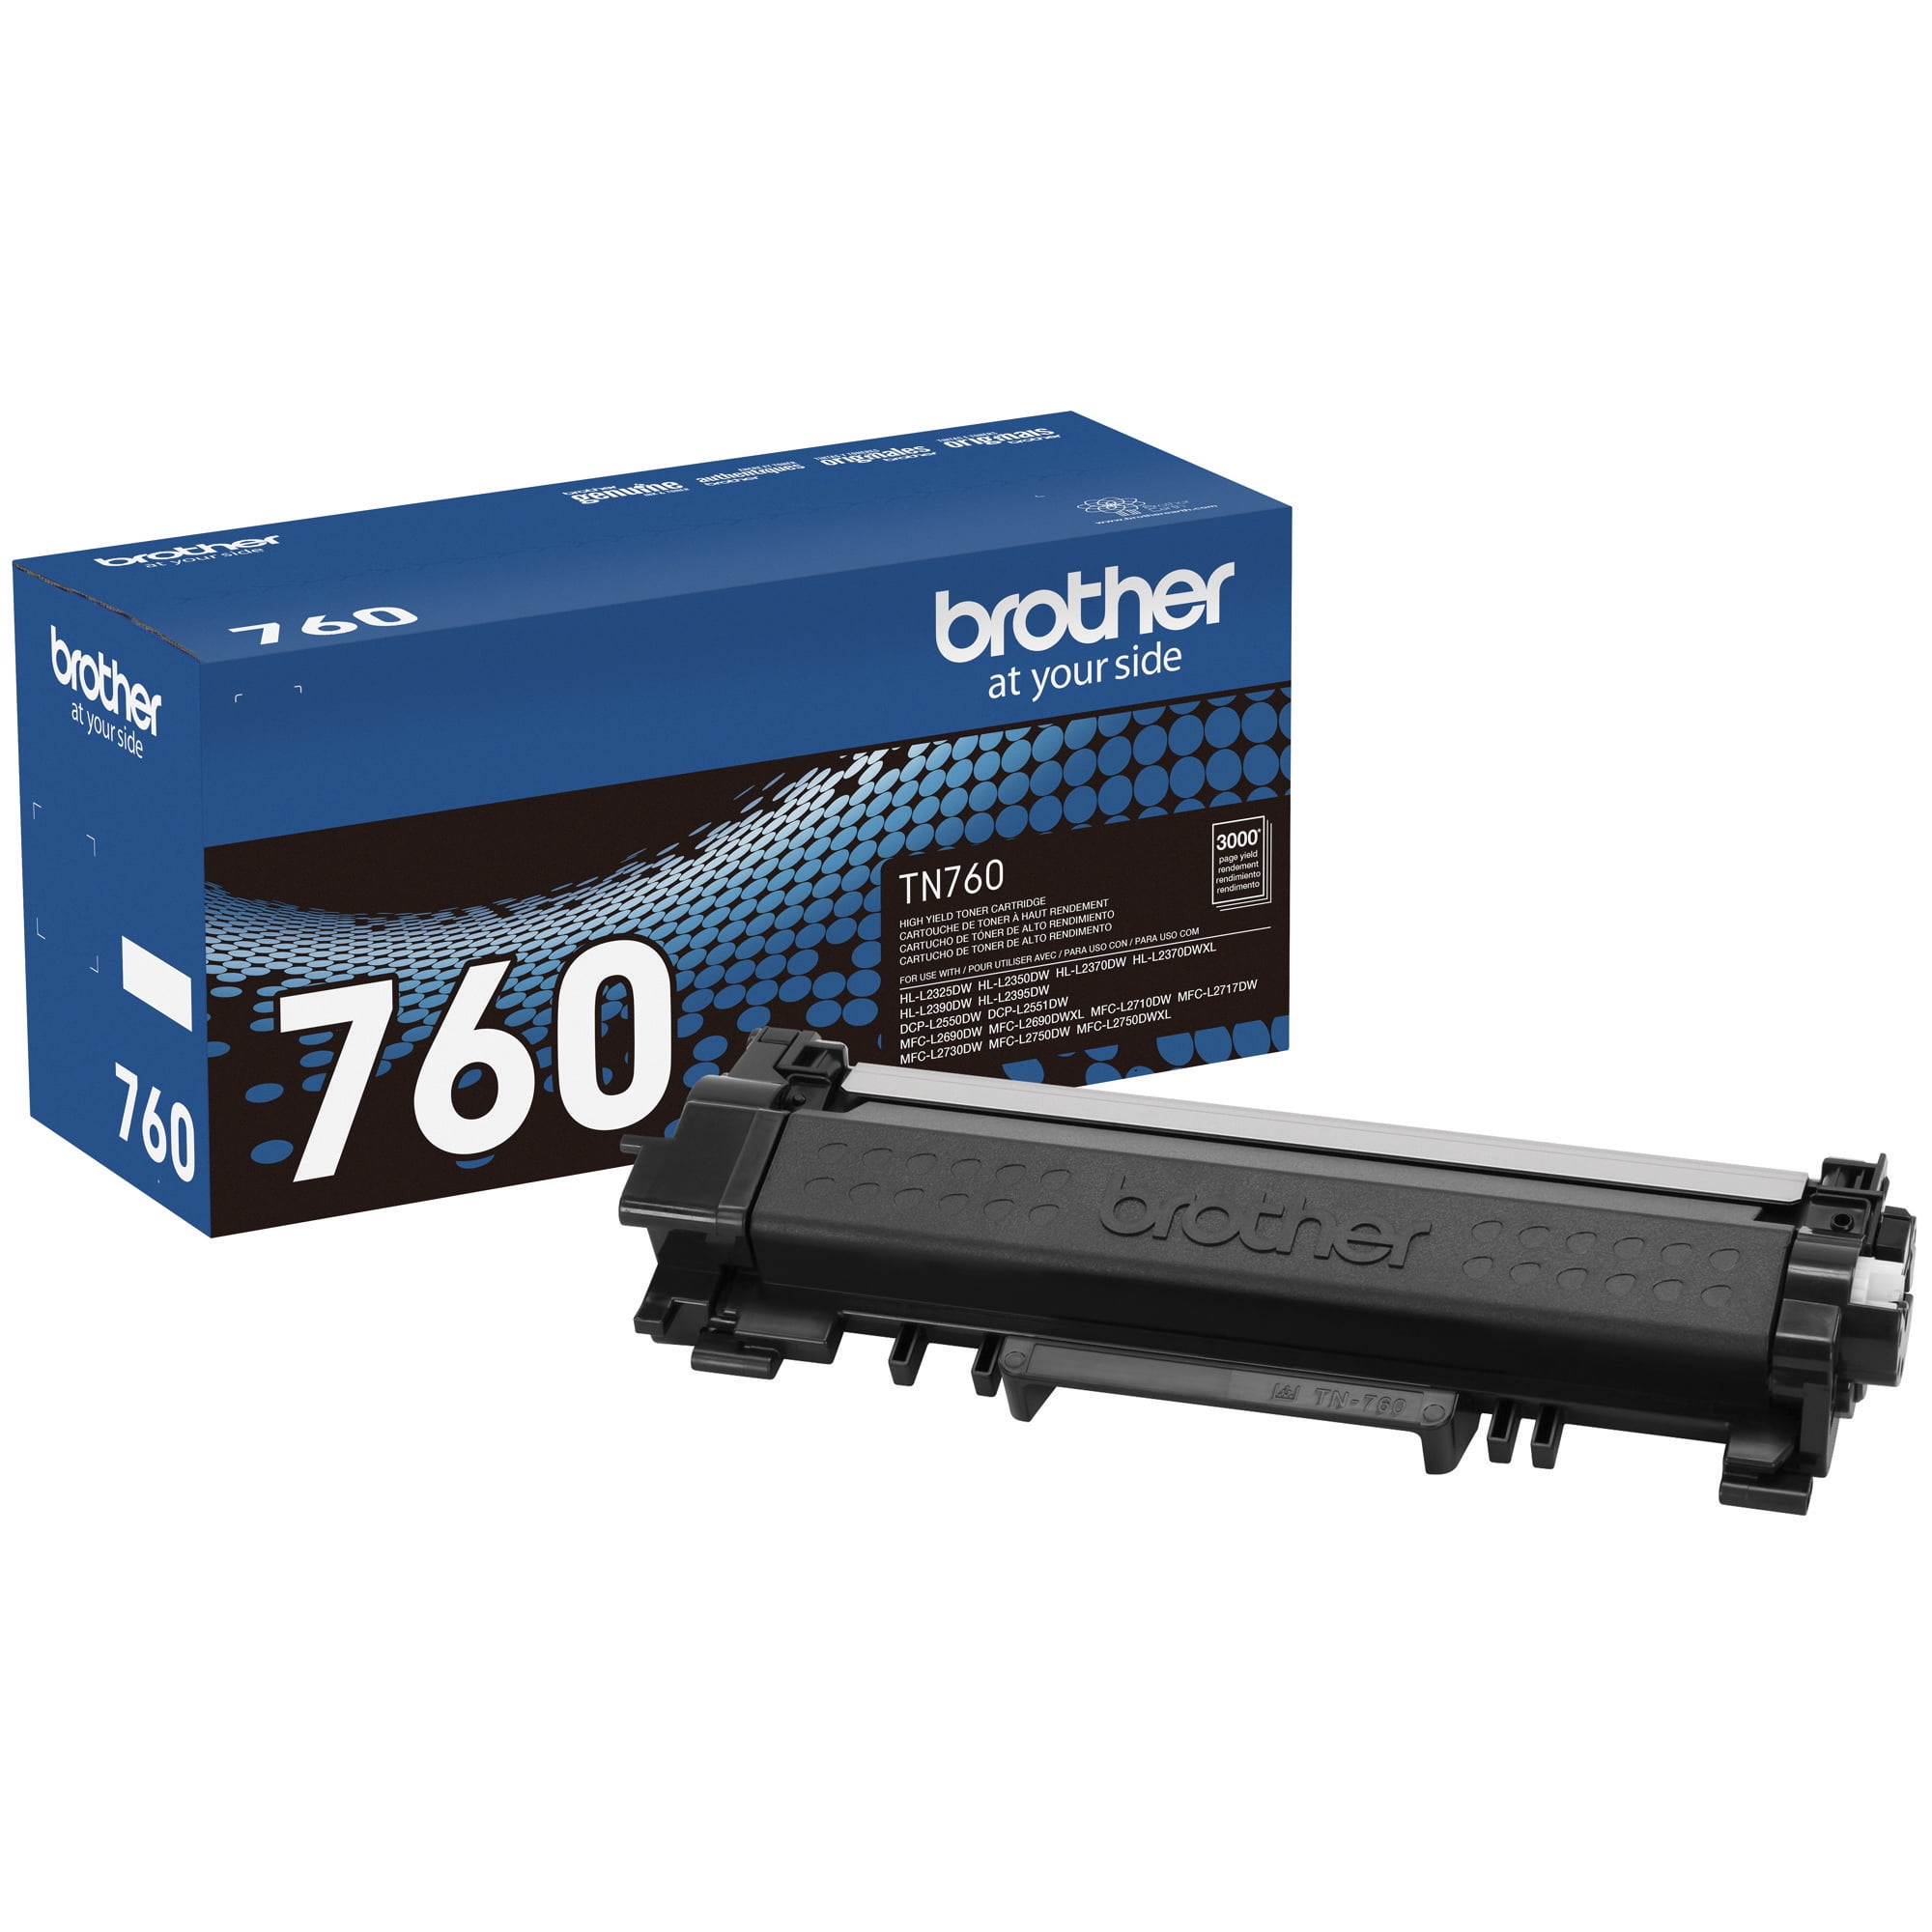 1 Pack Sold by Green Toner Supply Compatible TN660 TN630 Toner Cartridge TN-660 TN-630 for Brother DCP-L2520DW DCP-L2540DW MFC-L2720DW MFC-L2740DW Printer